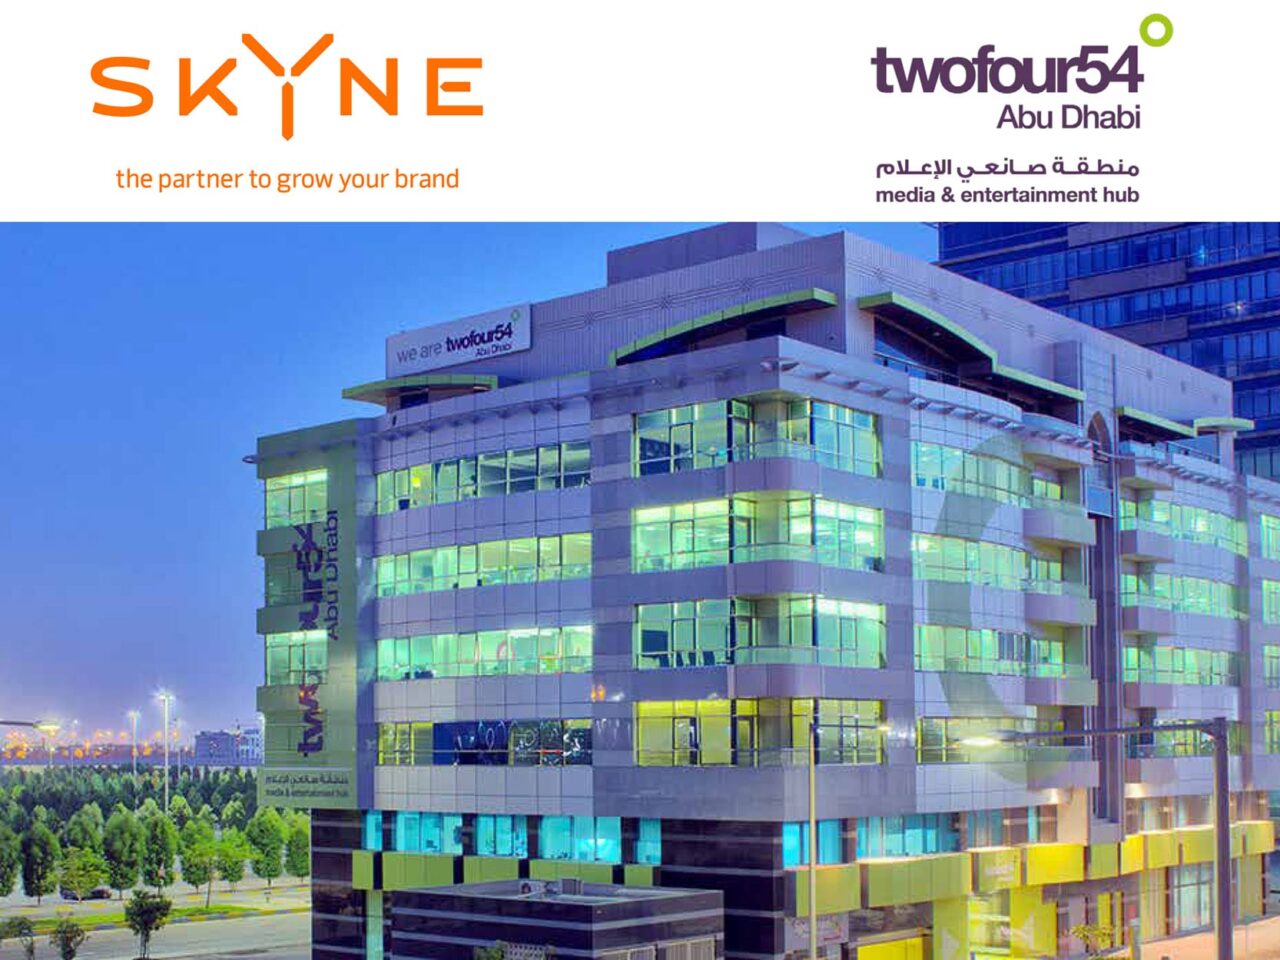 Skyne announces official business expansion to Twofour54, Abu Dhabi’s media hub